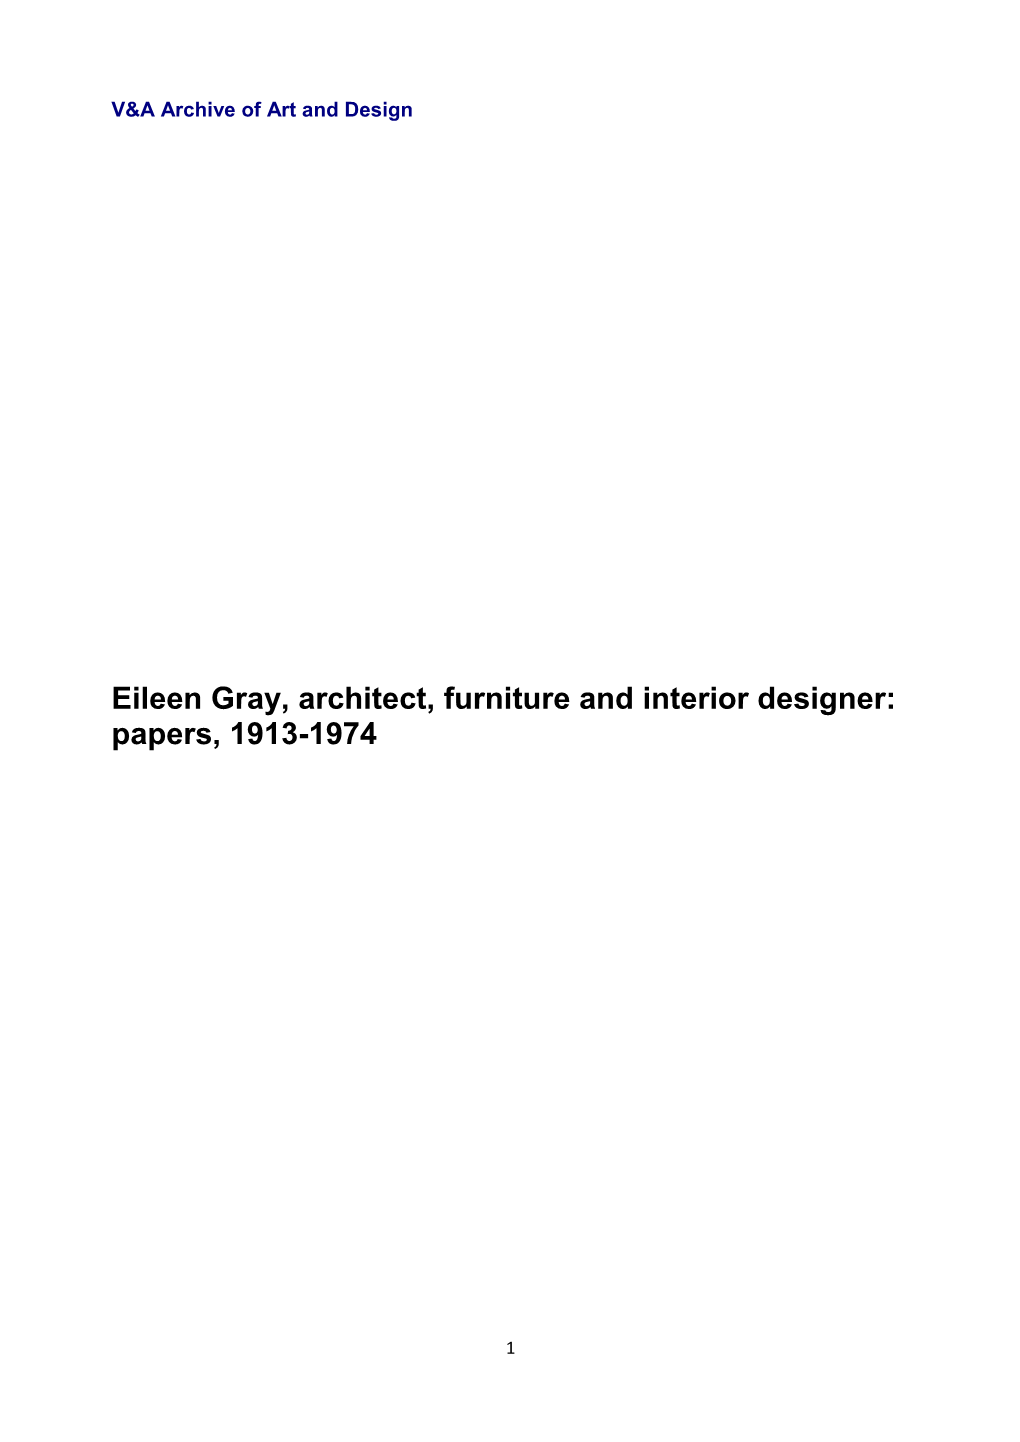 Eileen Gray, Architect, Furniture and Interior Designer: Papers, 1913-1974